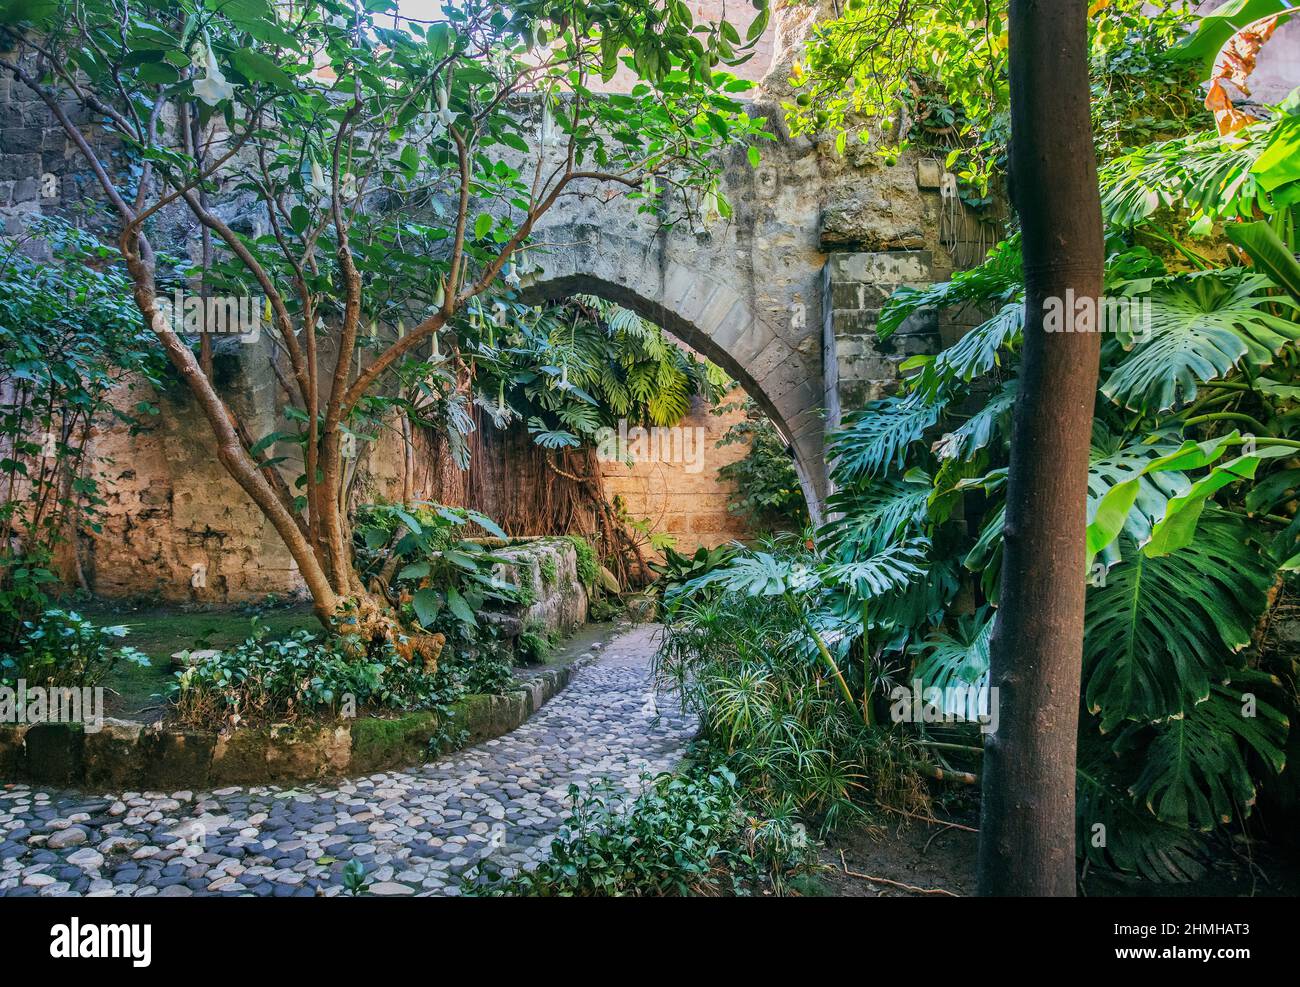 Path in the enchanted monastery garden with archway of the Church of San Giovanni degli Eremiti, Palermo, Sicily, Italy Stock Photo